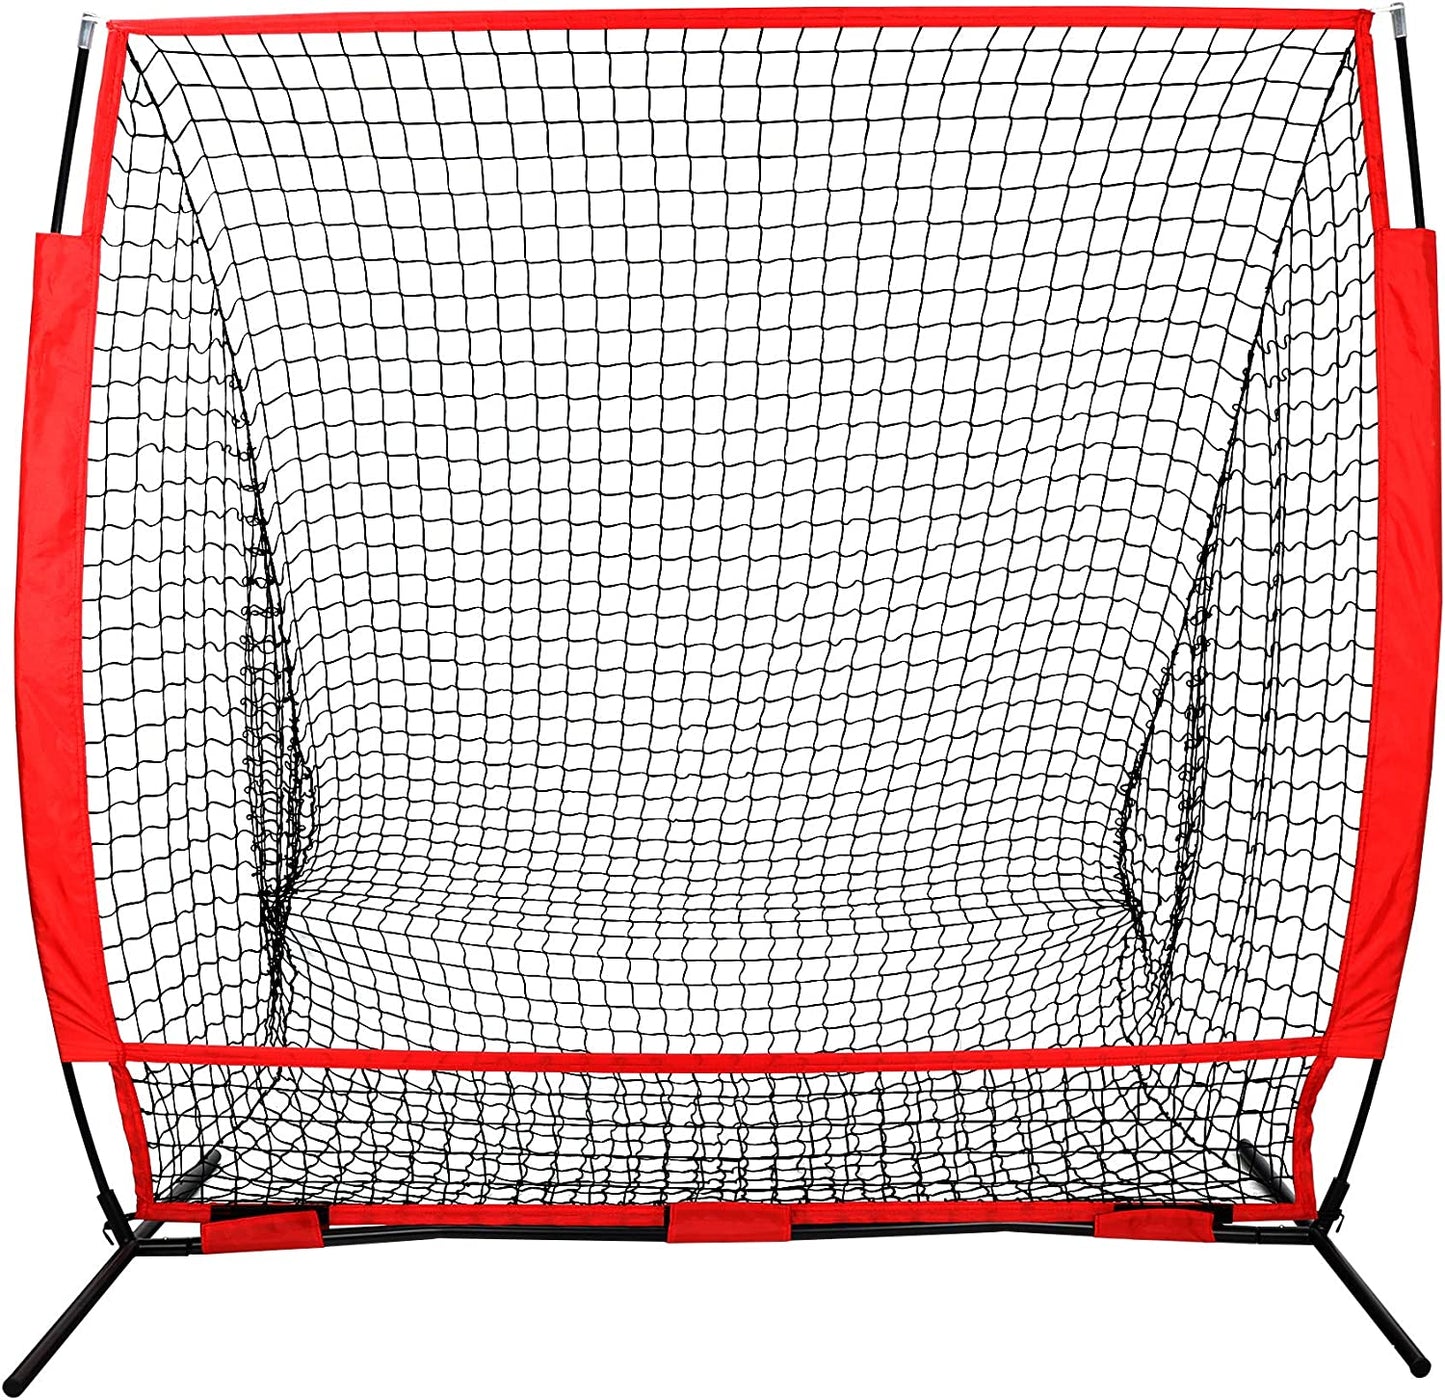 Portable Baseball Softball Practice Net Hitting Pitching Batting Training Net w/Carry Bag & Metal Frame Great for Indoor Outdoor Practice